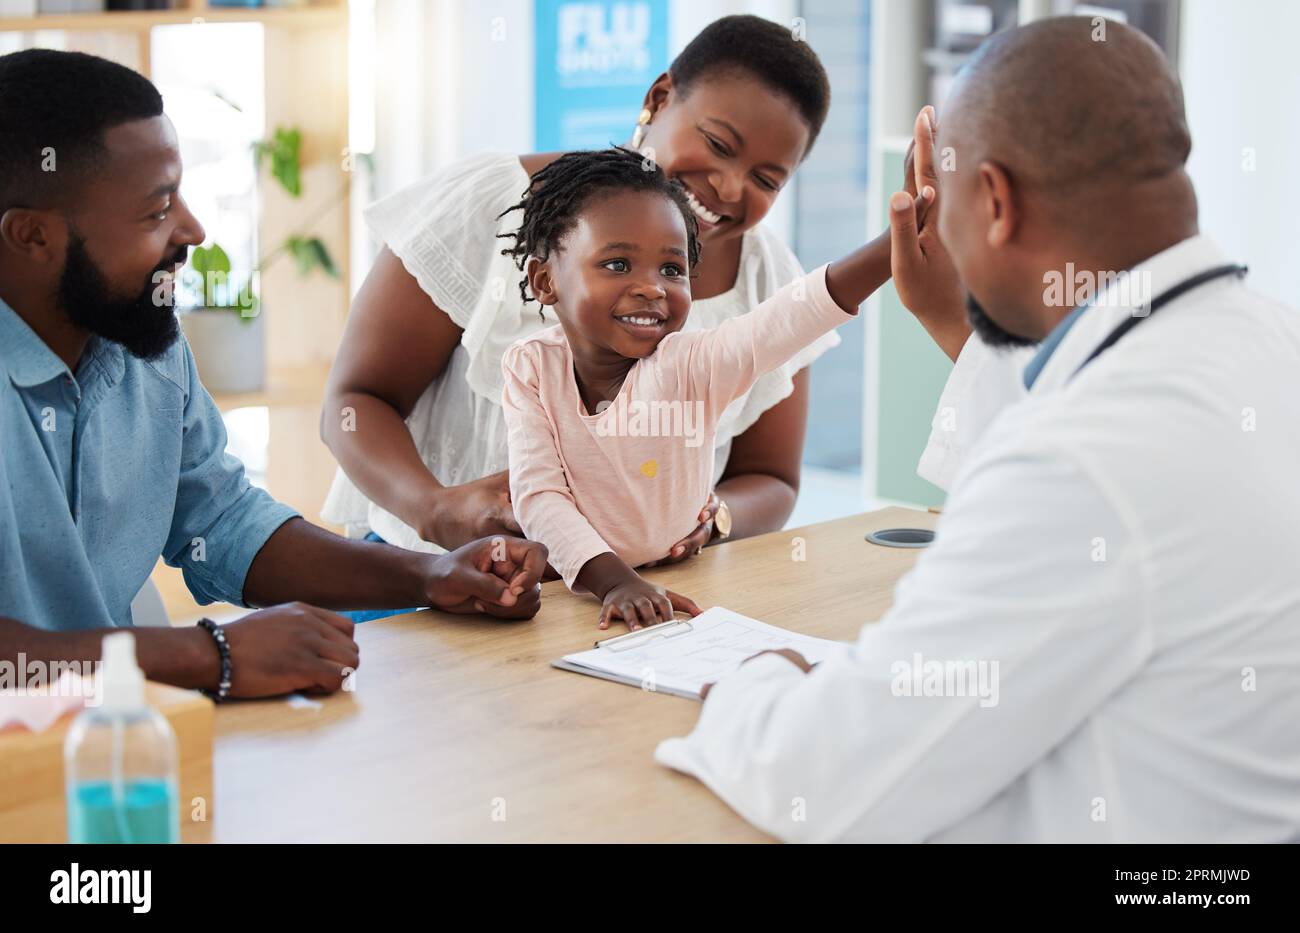 High five, doctor and family with a girl and her parents at the hospital for consulting, appointment and healthcare. Medicine, trust and support in a medical clinic with a health professional Stock Photo